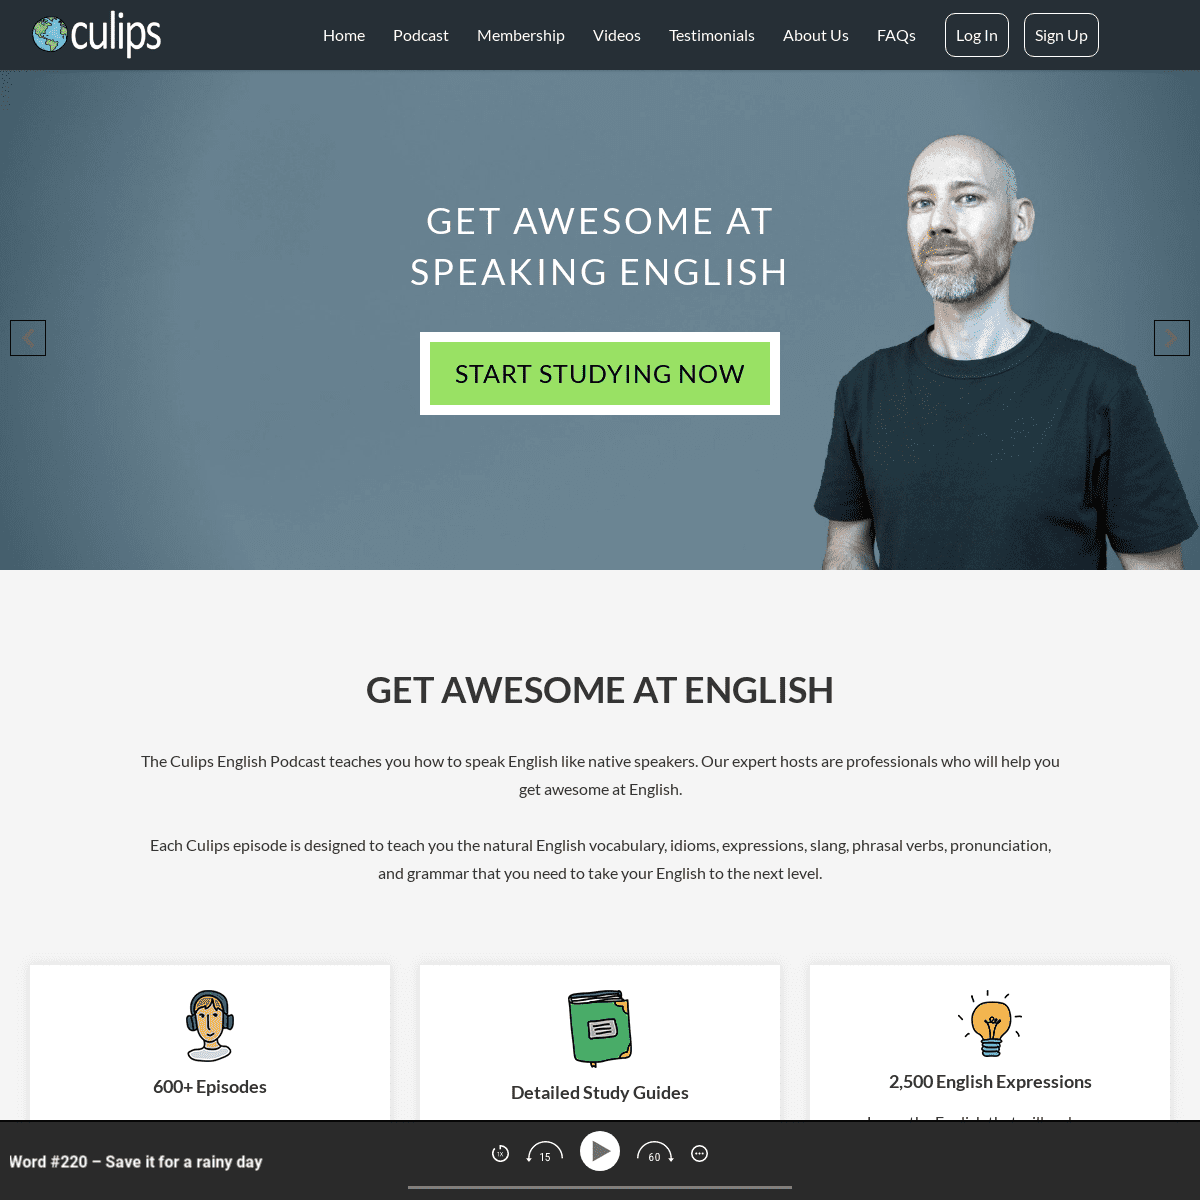 A complete backup of culips.com